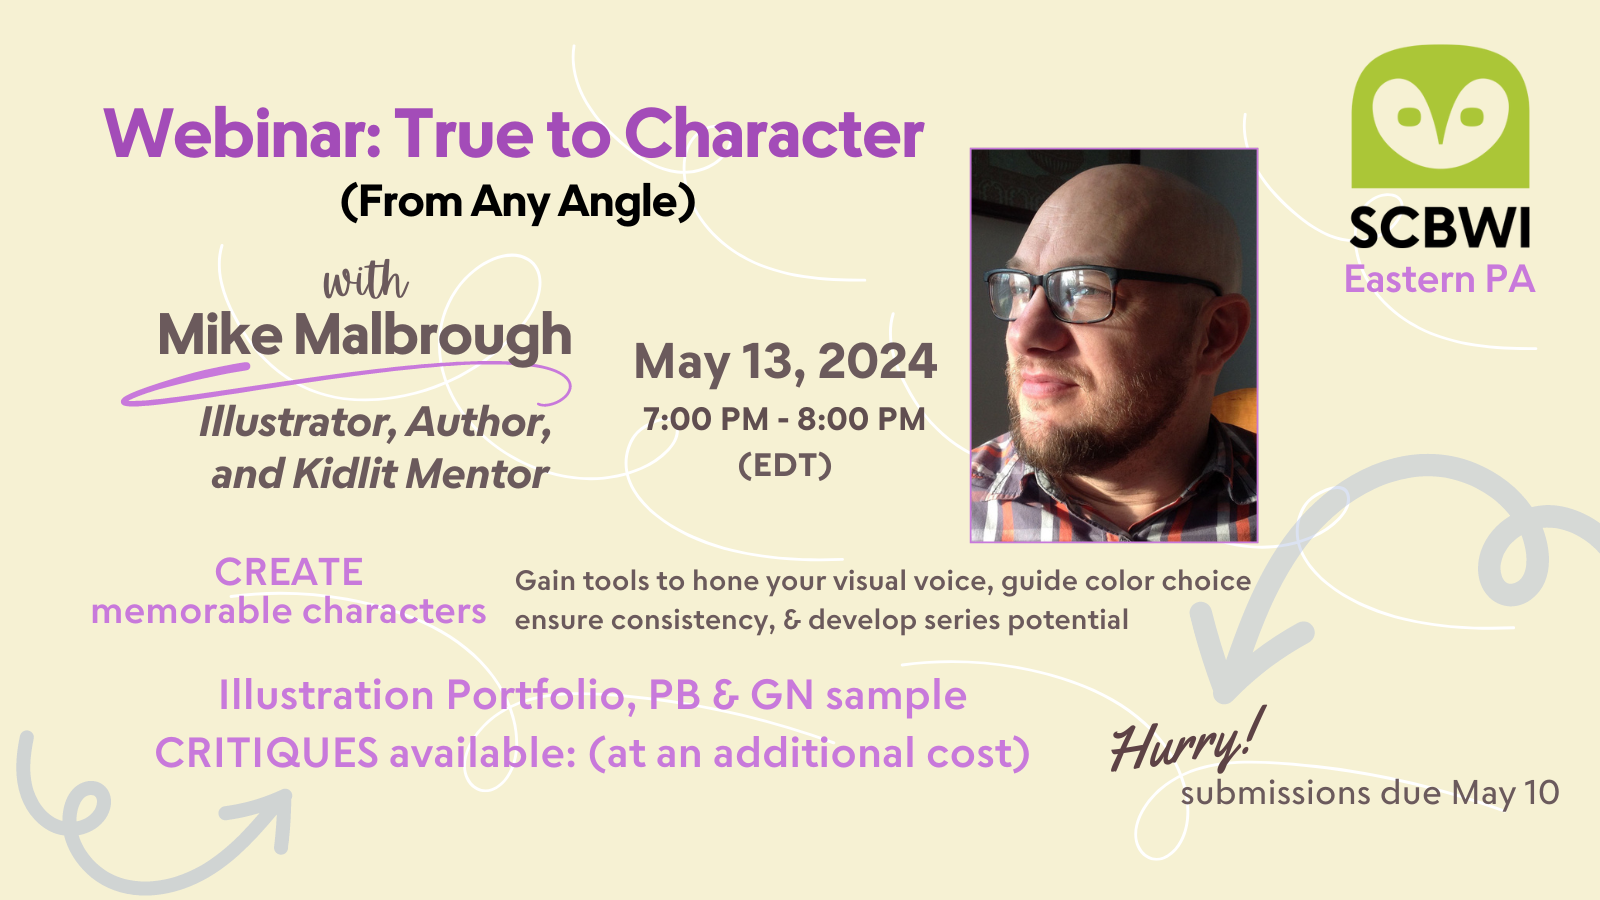 Webinar: True to Character (From Any Angle) with Mike Malbrough - Illustrator, Author, and Kidlit Mentor
May 13, 2024
7pm-8pm (EDT)
Create memorable characters
Gain tools to hone your visual voice, guide color choice, ensure consistency, and develop series potential
Illustration Portfolio, PB and GN sample critiques available at an additional cost - Hurry! Submissions due May 10